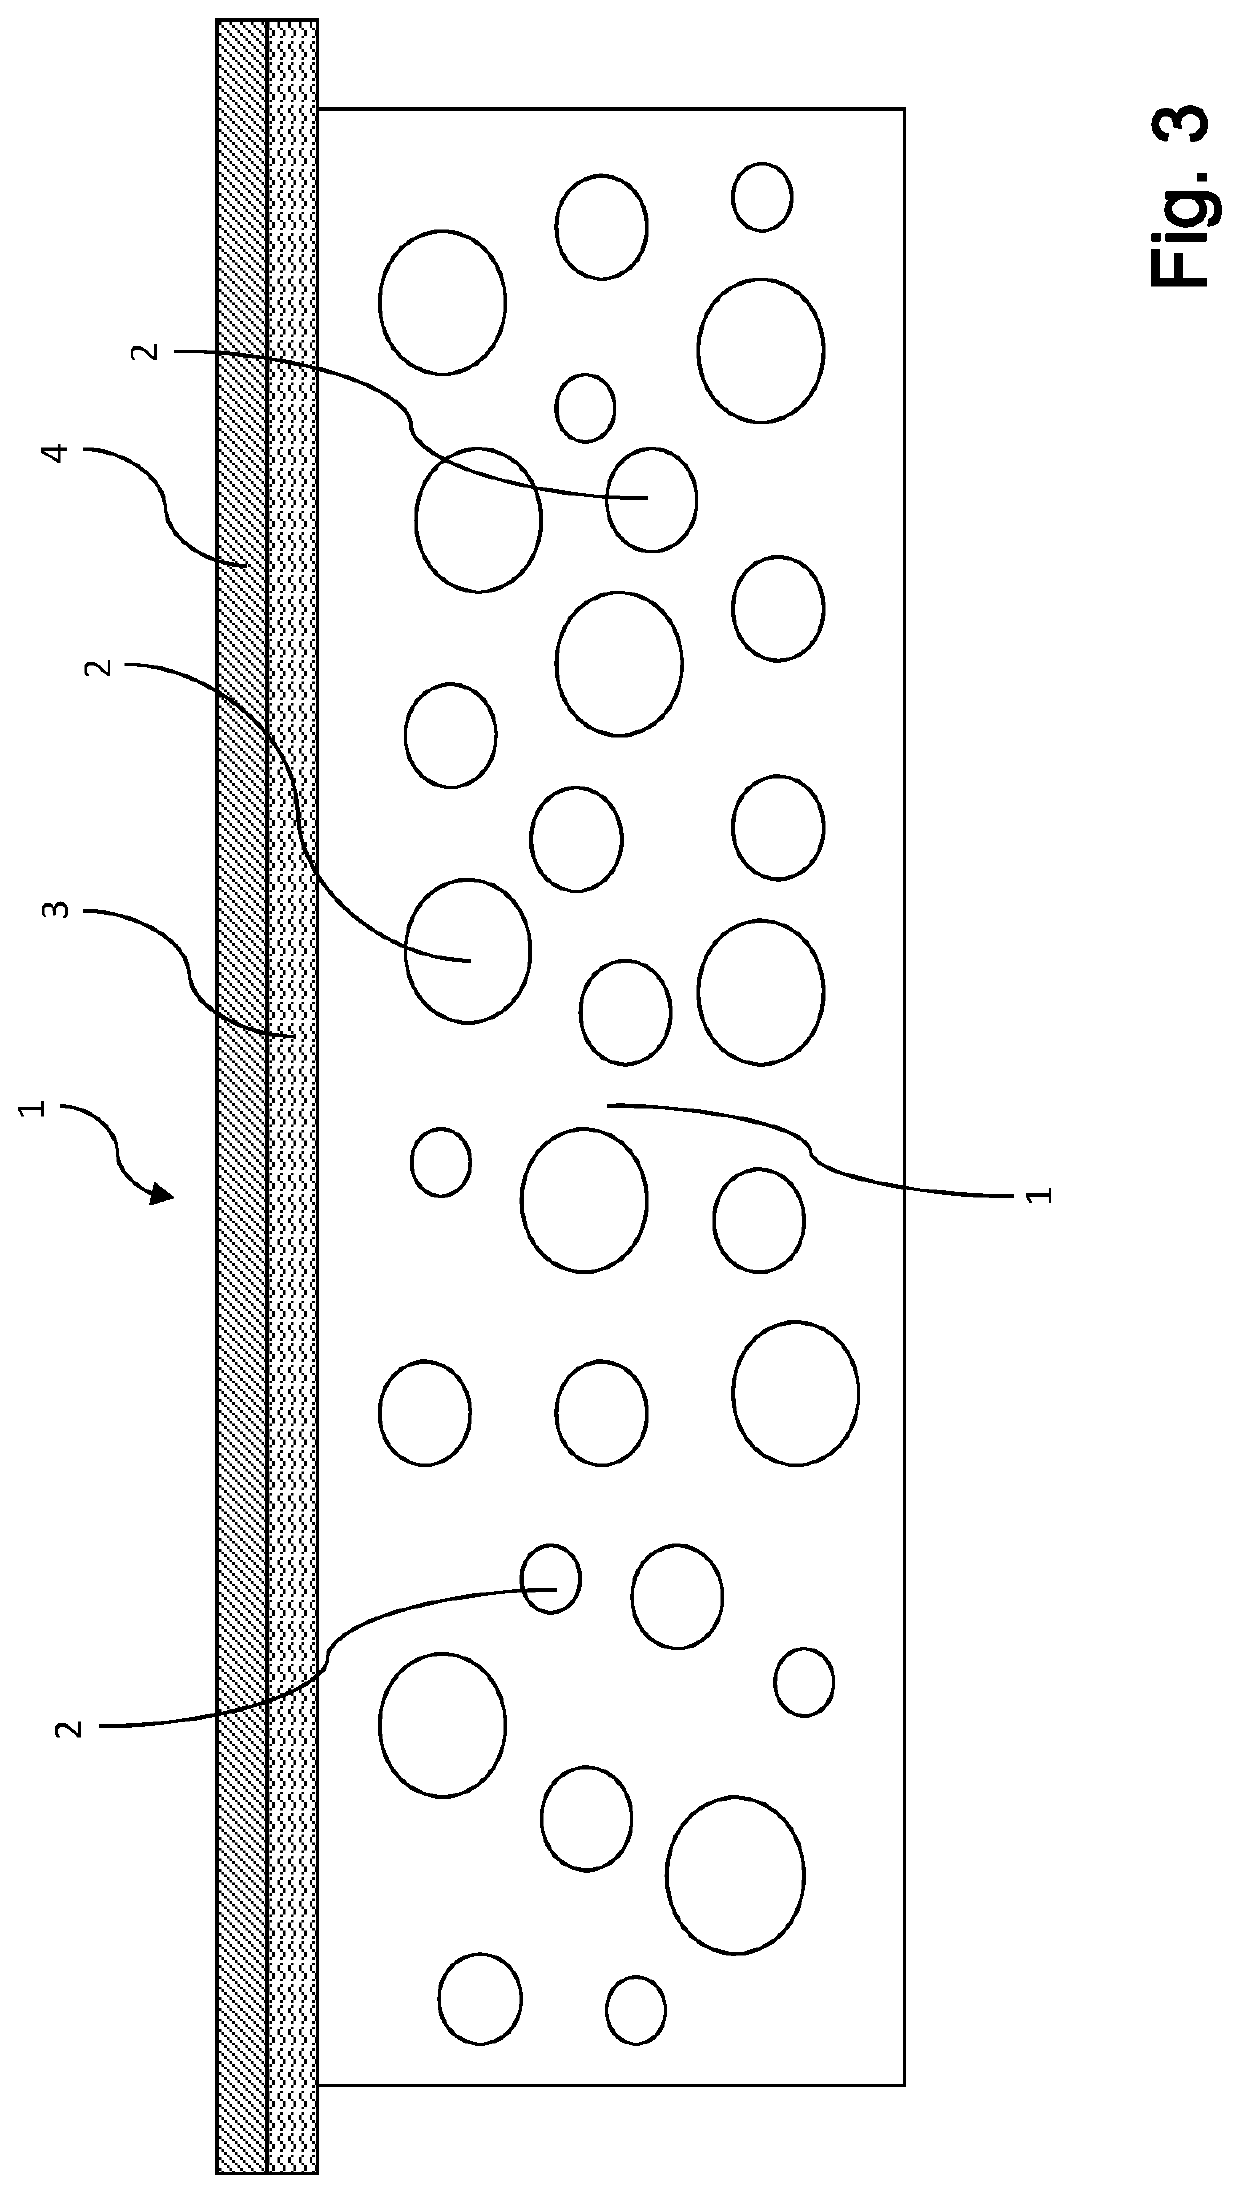 Plasma-based films and methods for making and using the same